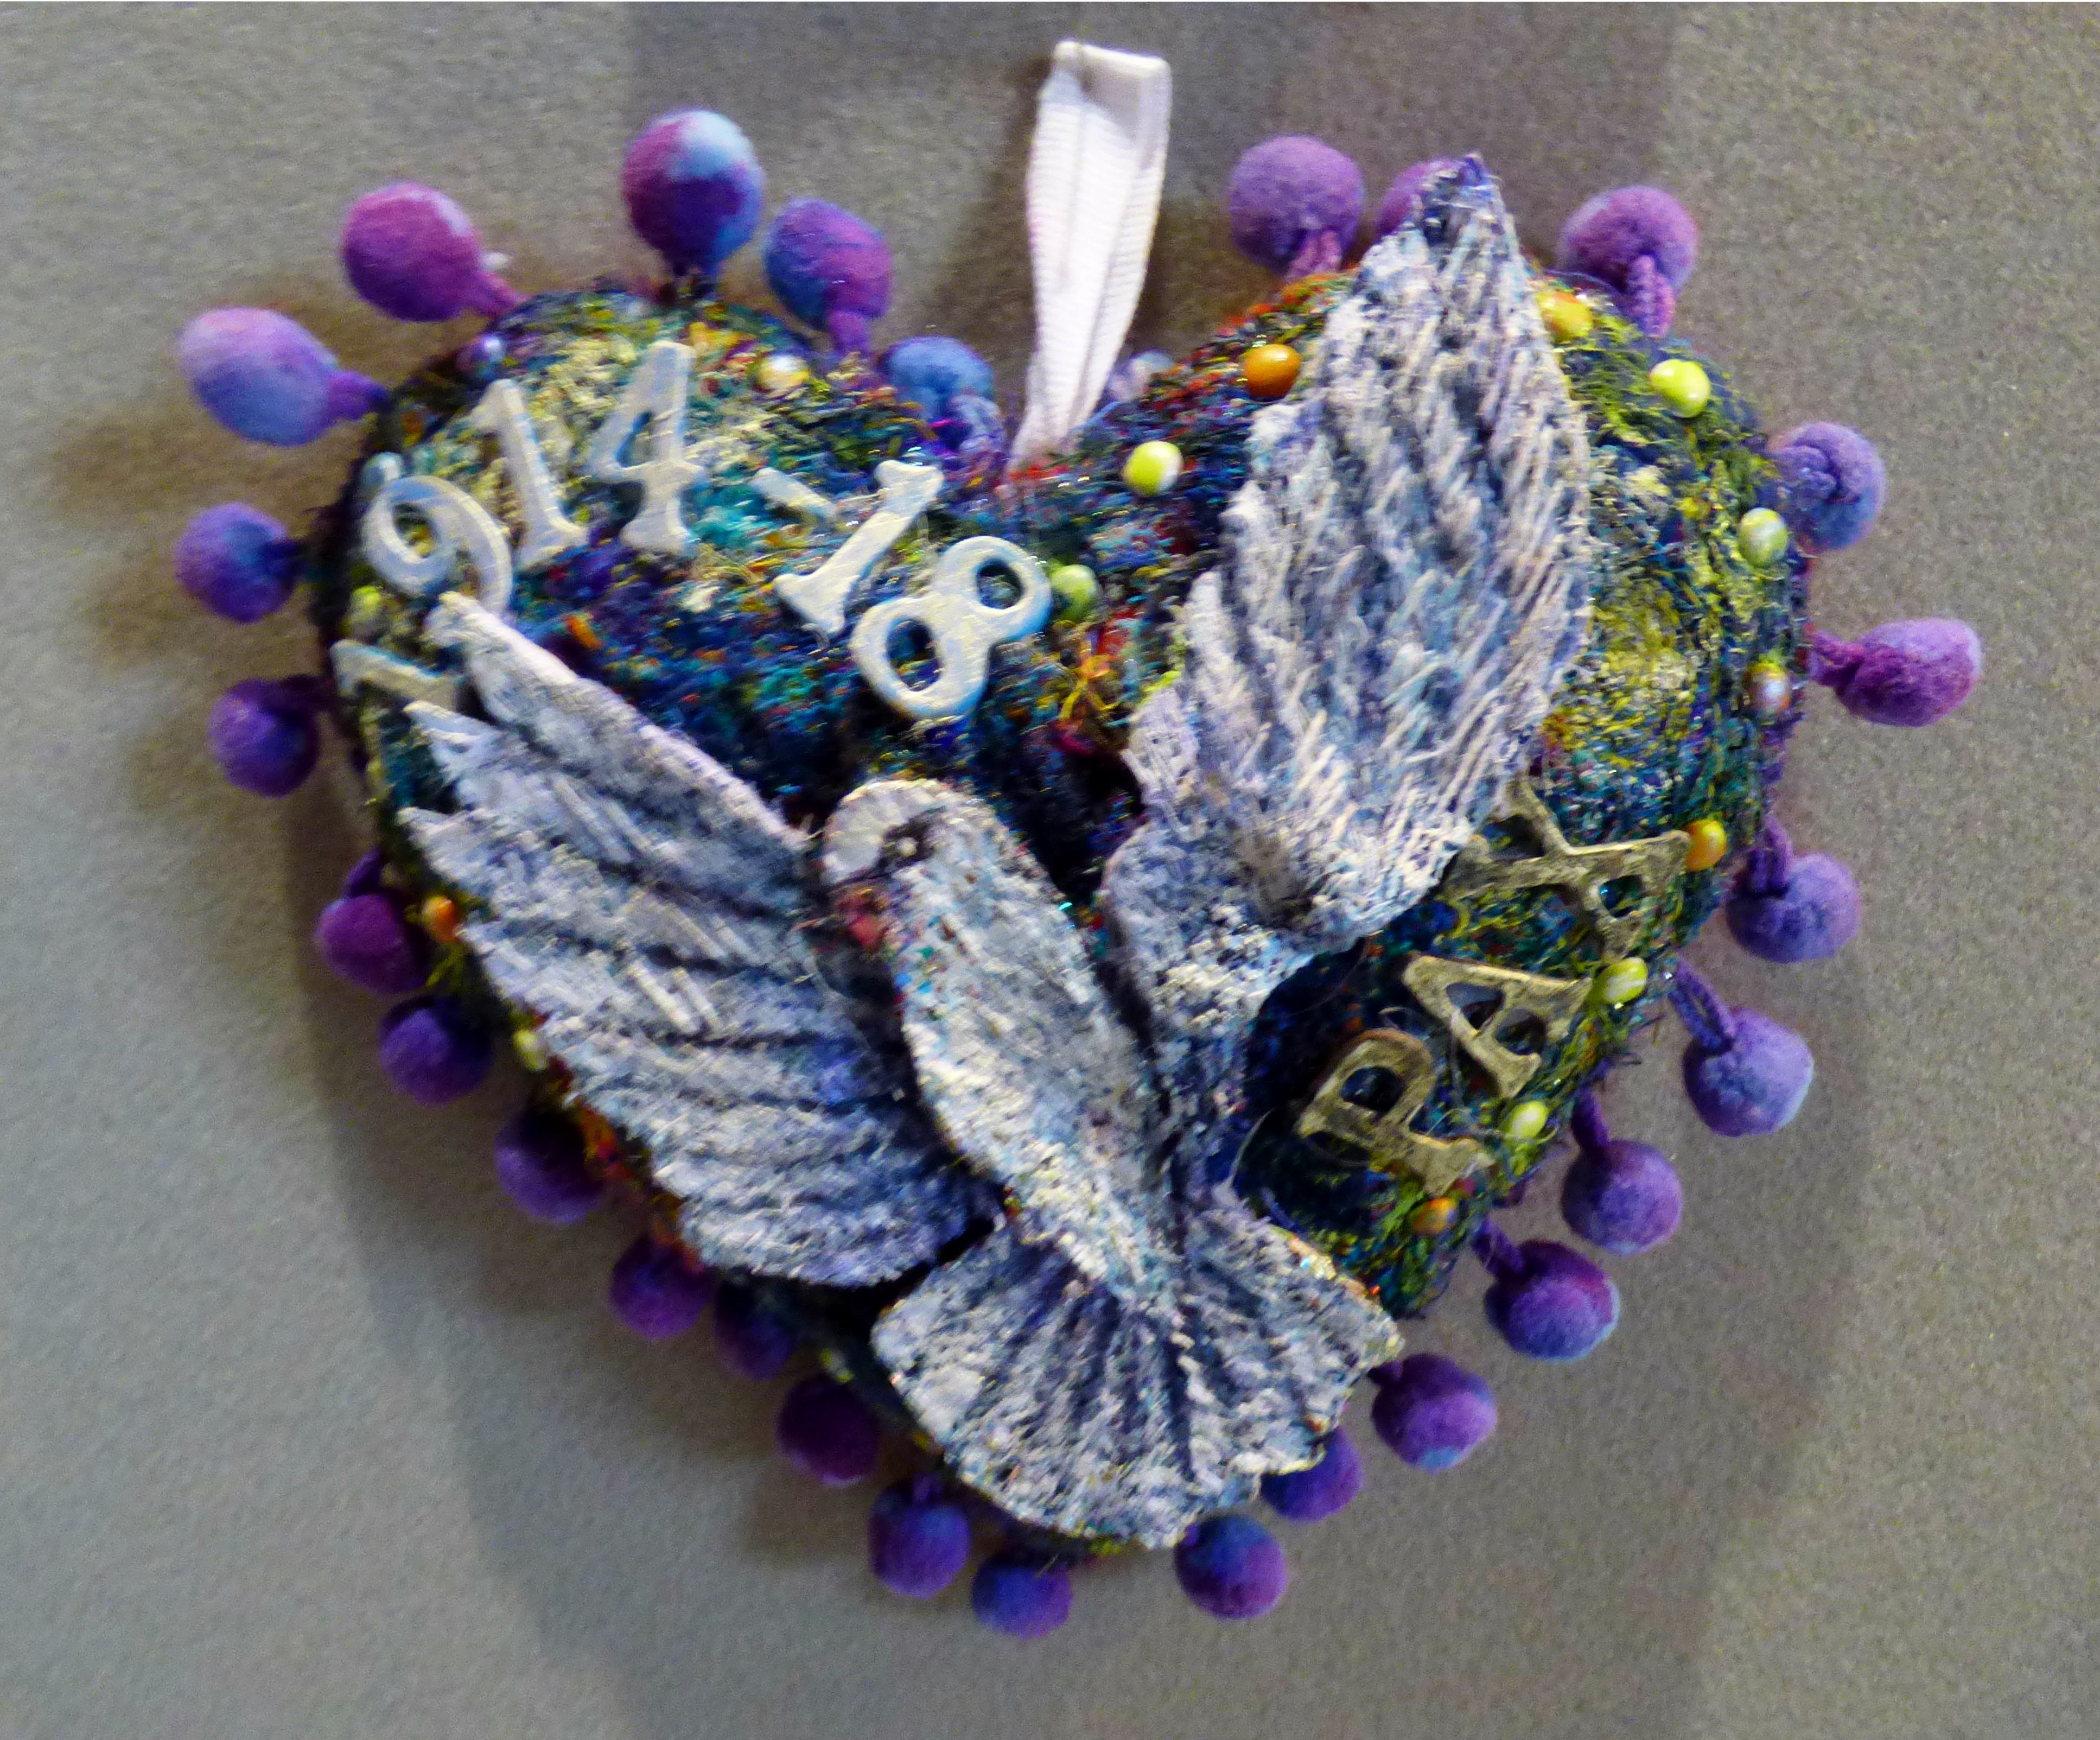 PEACE DOVE by NIKKI PARAMENTER, in memory of a time when peace was lost, 100 Hearts exhibition, Liverpool Cathedral, Sept 2018